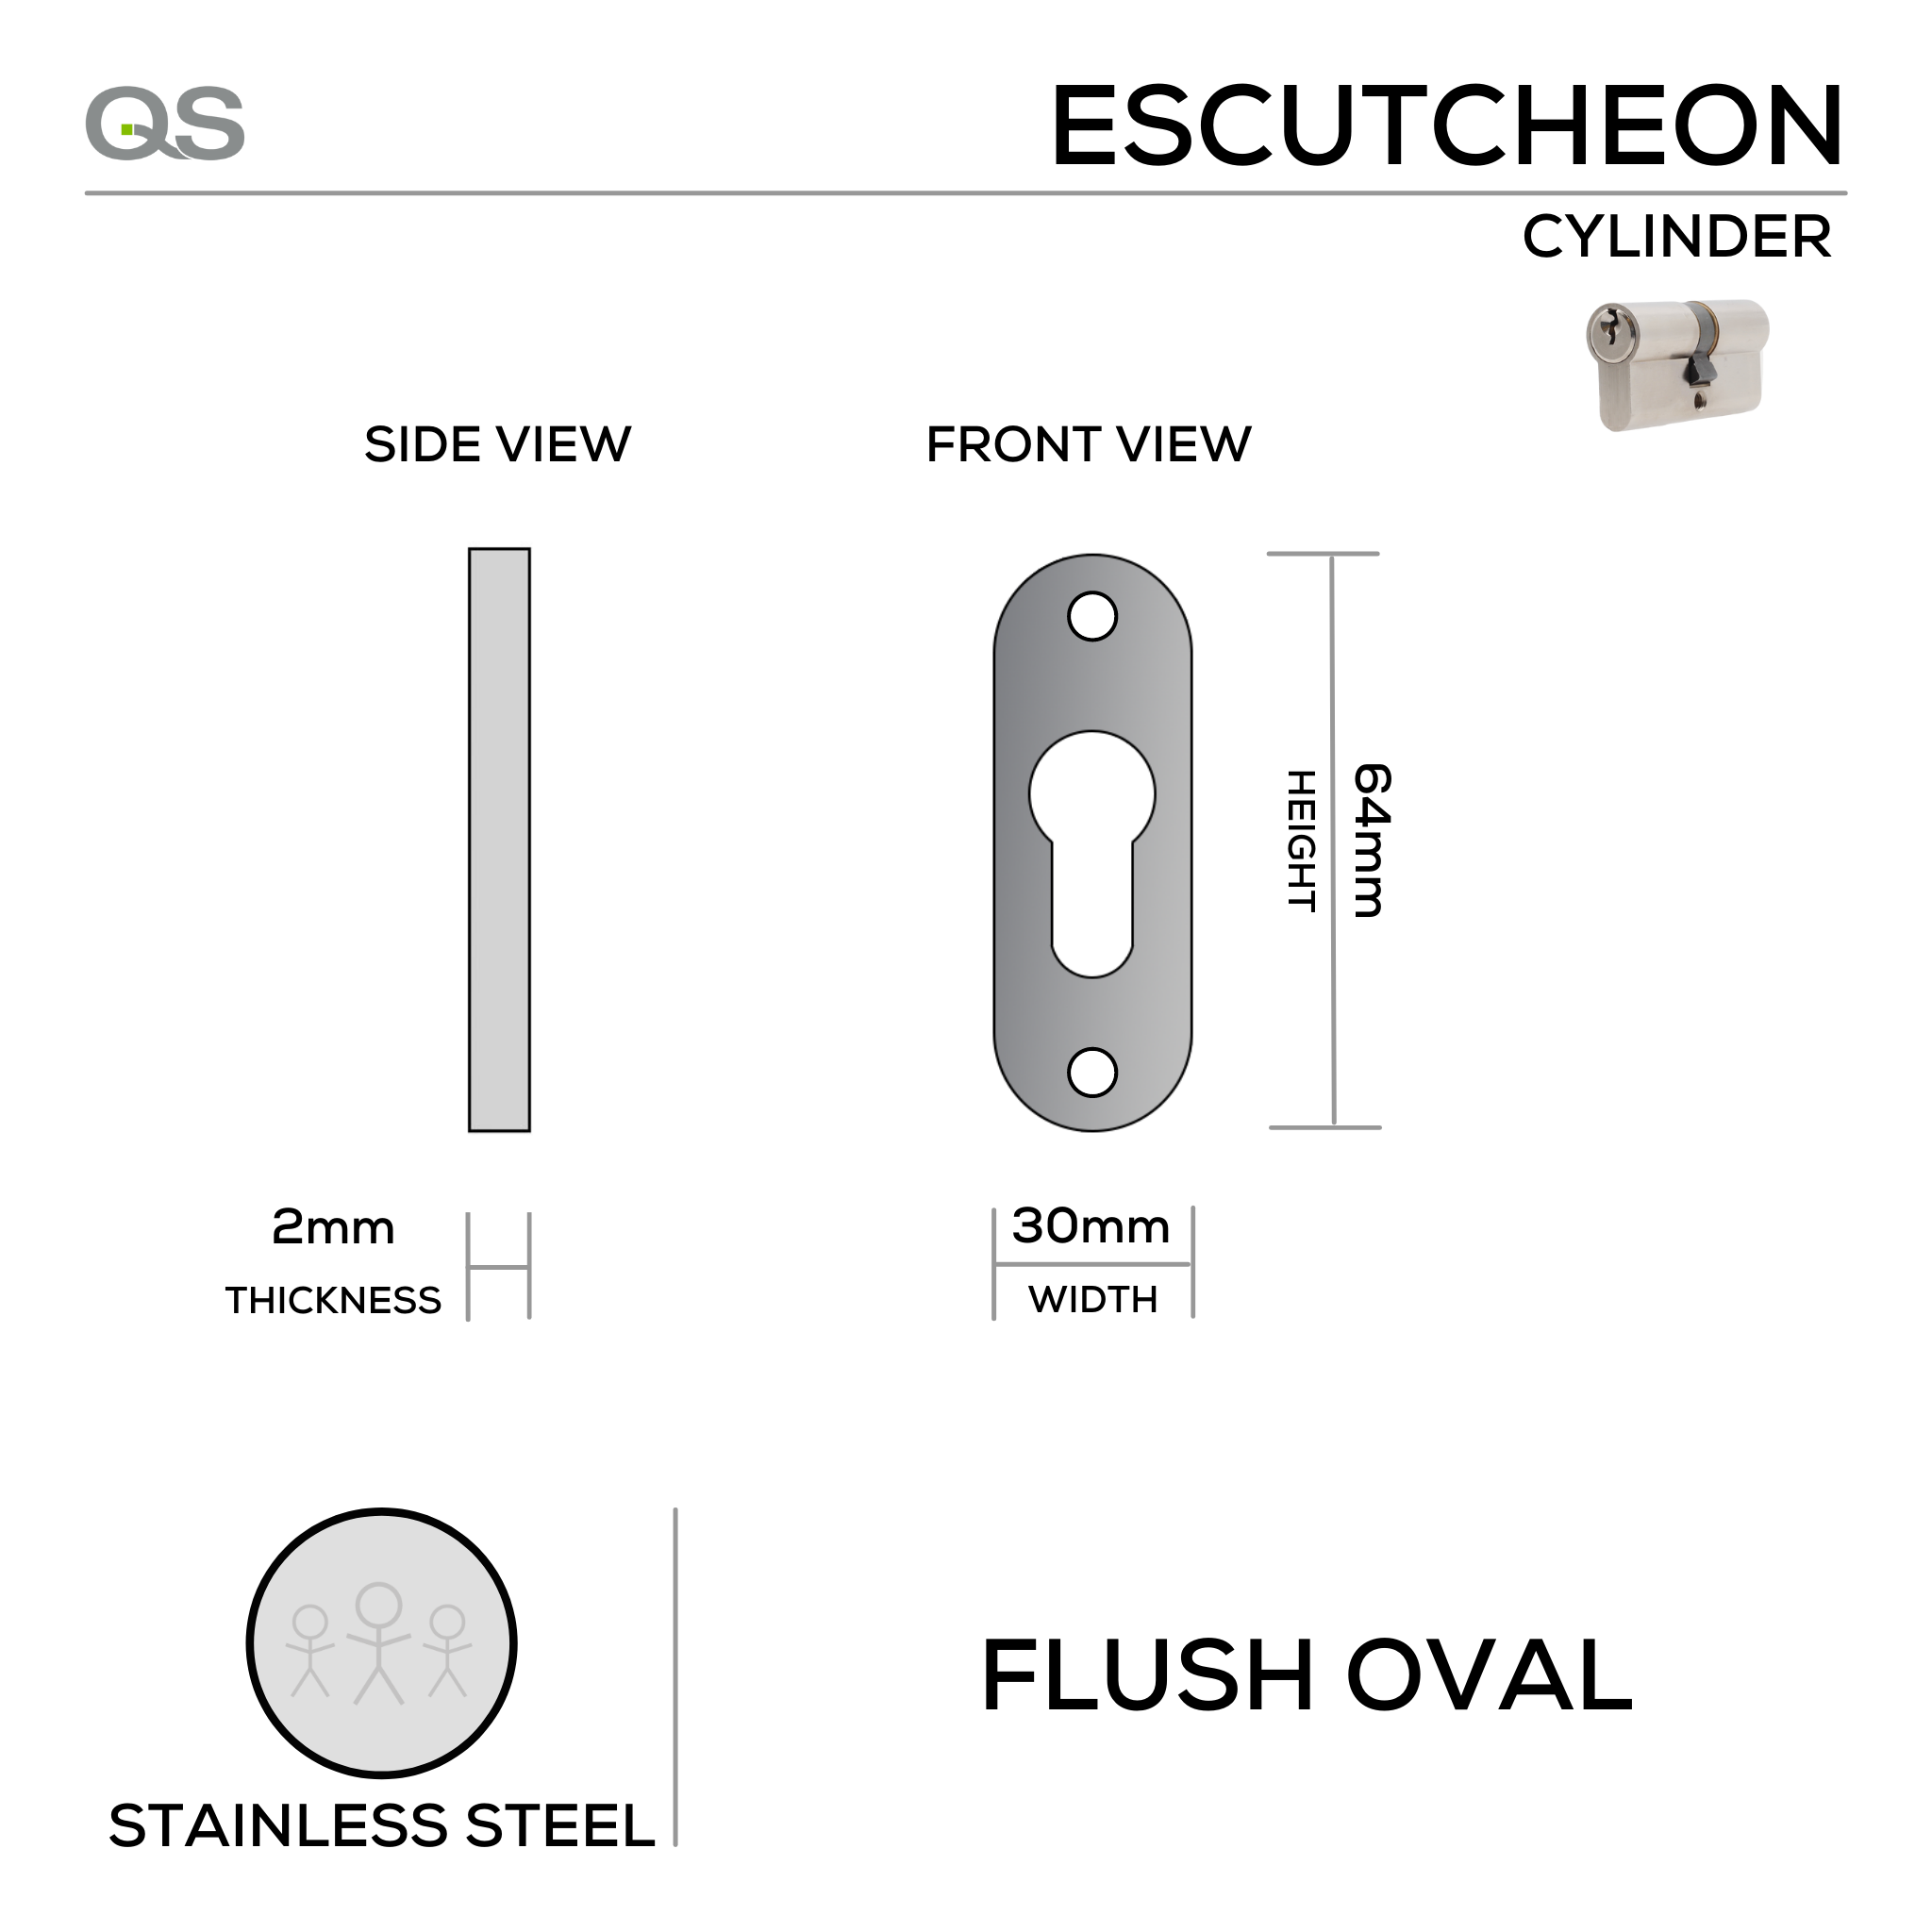 QS4407, Cylinder Escutcheon, Flush Oval Rose, 64mm (h) x 30mm (w) x 2mm (t), Stainless Steel, QS